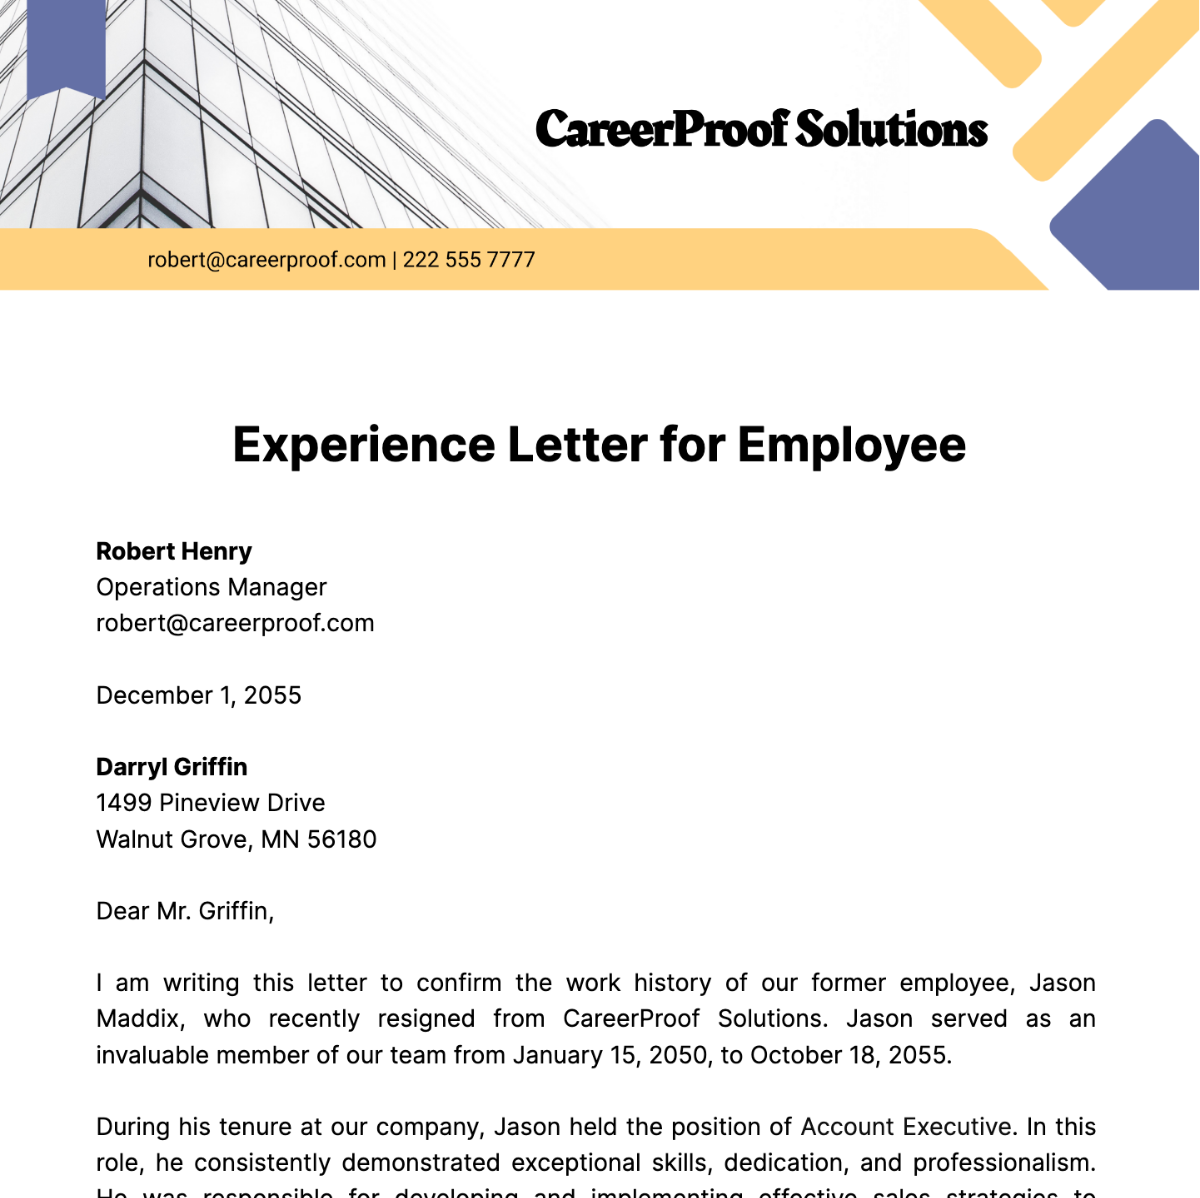 Experience Letter for Employee   Template